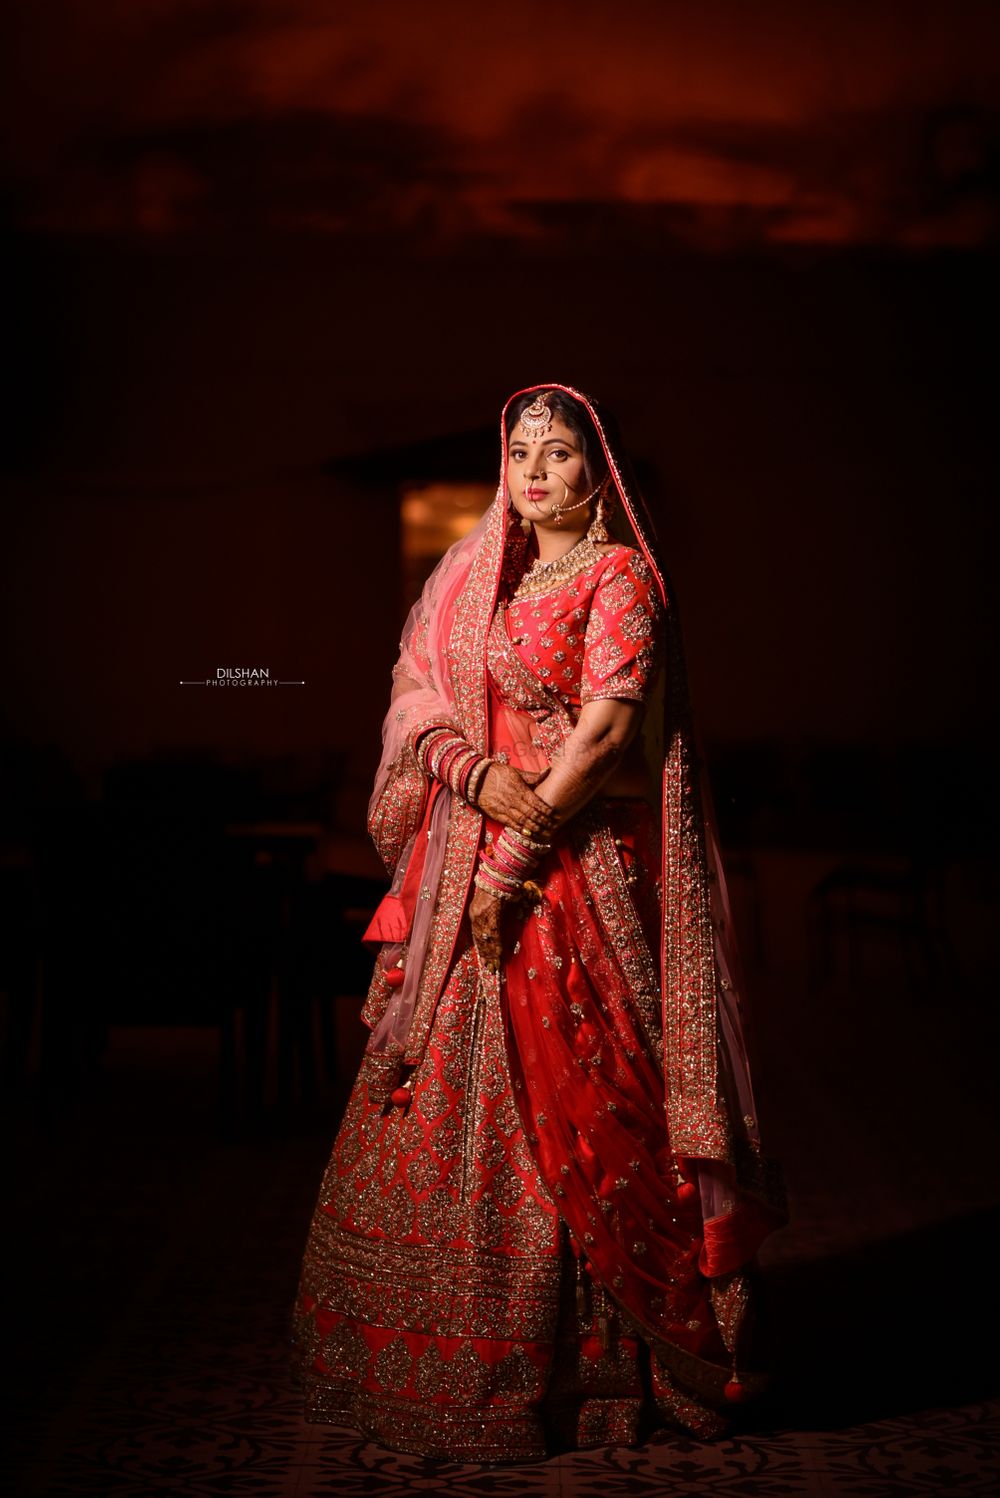 Photo From Arshee + Pranav - By Dilshan Photography